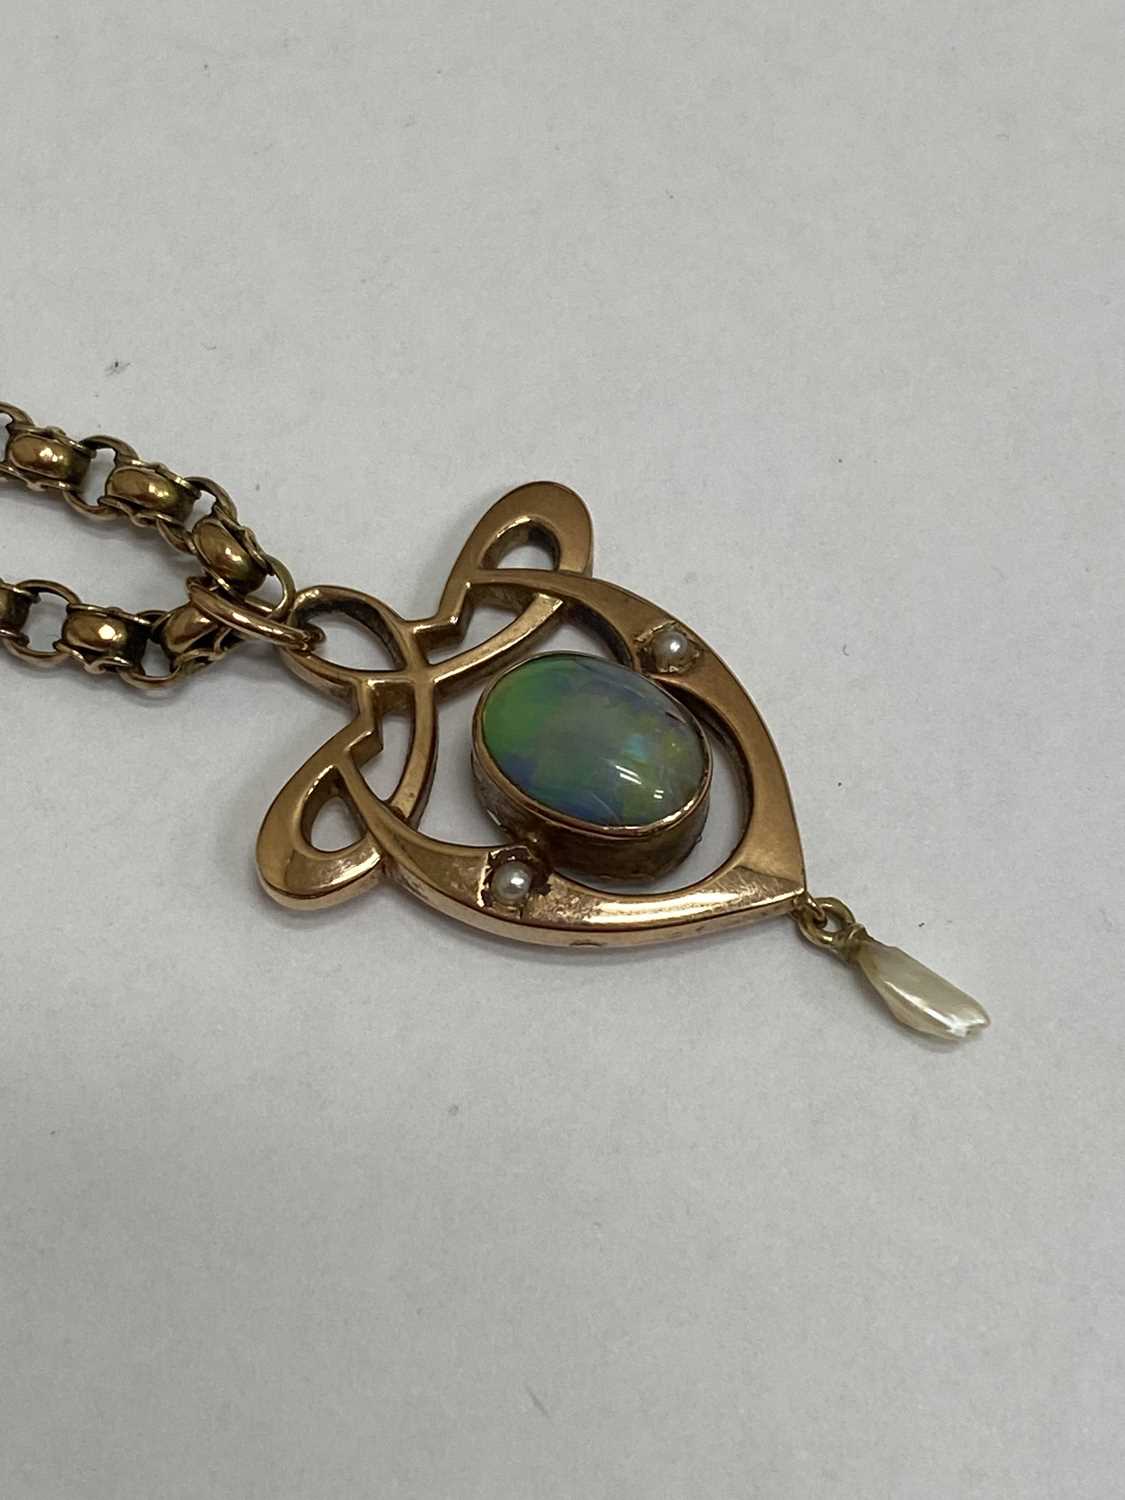 An Arts and Crafts opal pendant on chain - Image 7 of 11